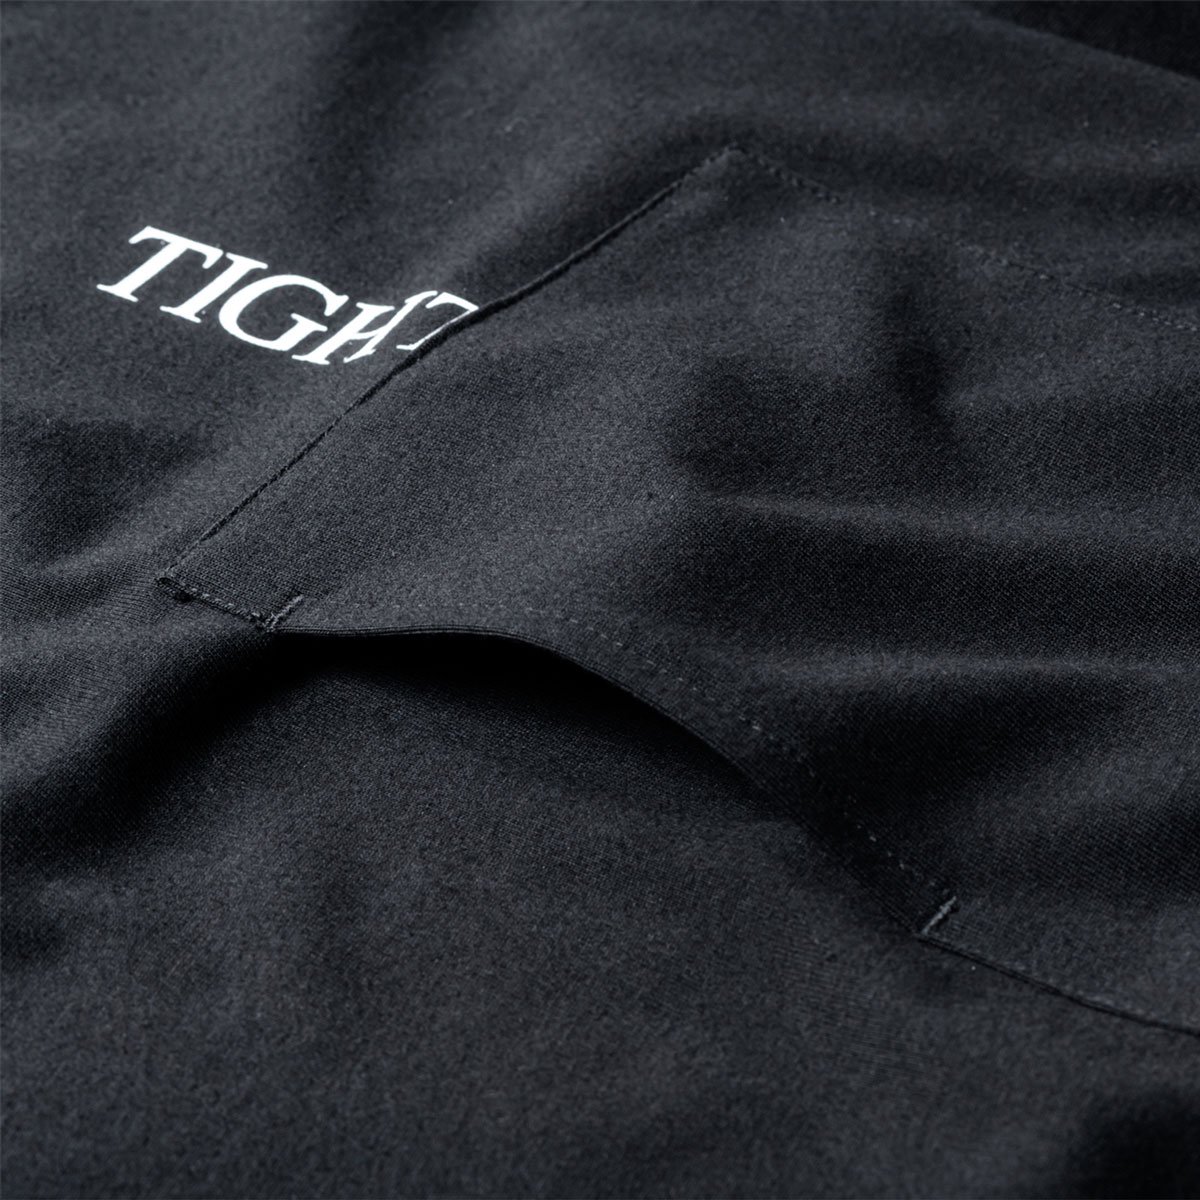 TIGHTBOOTH STRAIGHT UP L/S T-SHIRT XLTシャツ/カットソー(七分/長袖 